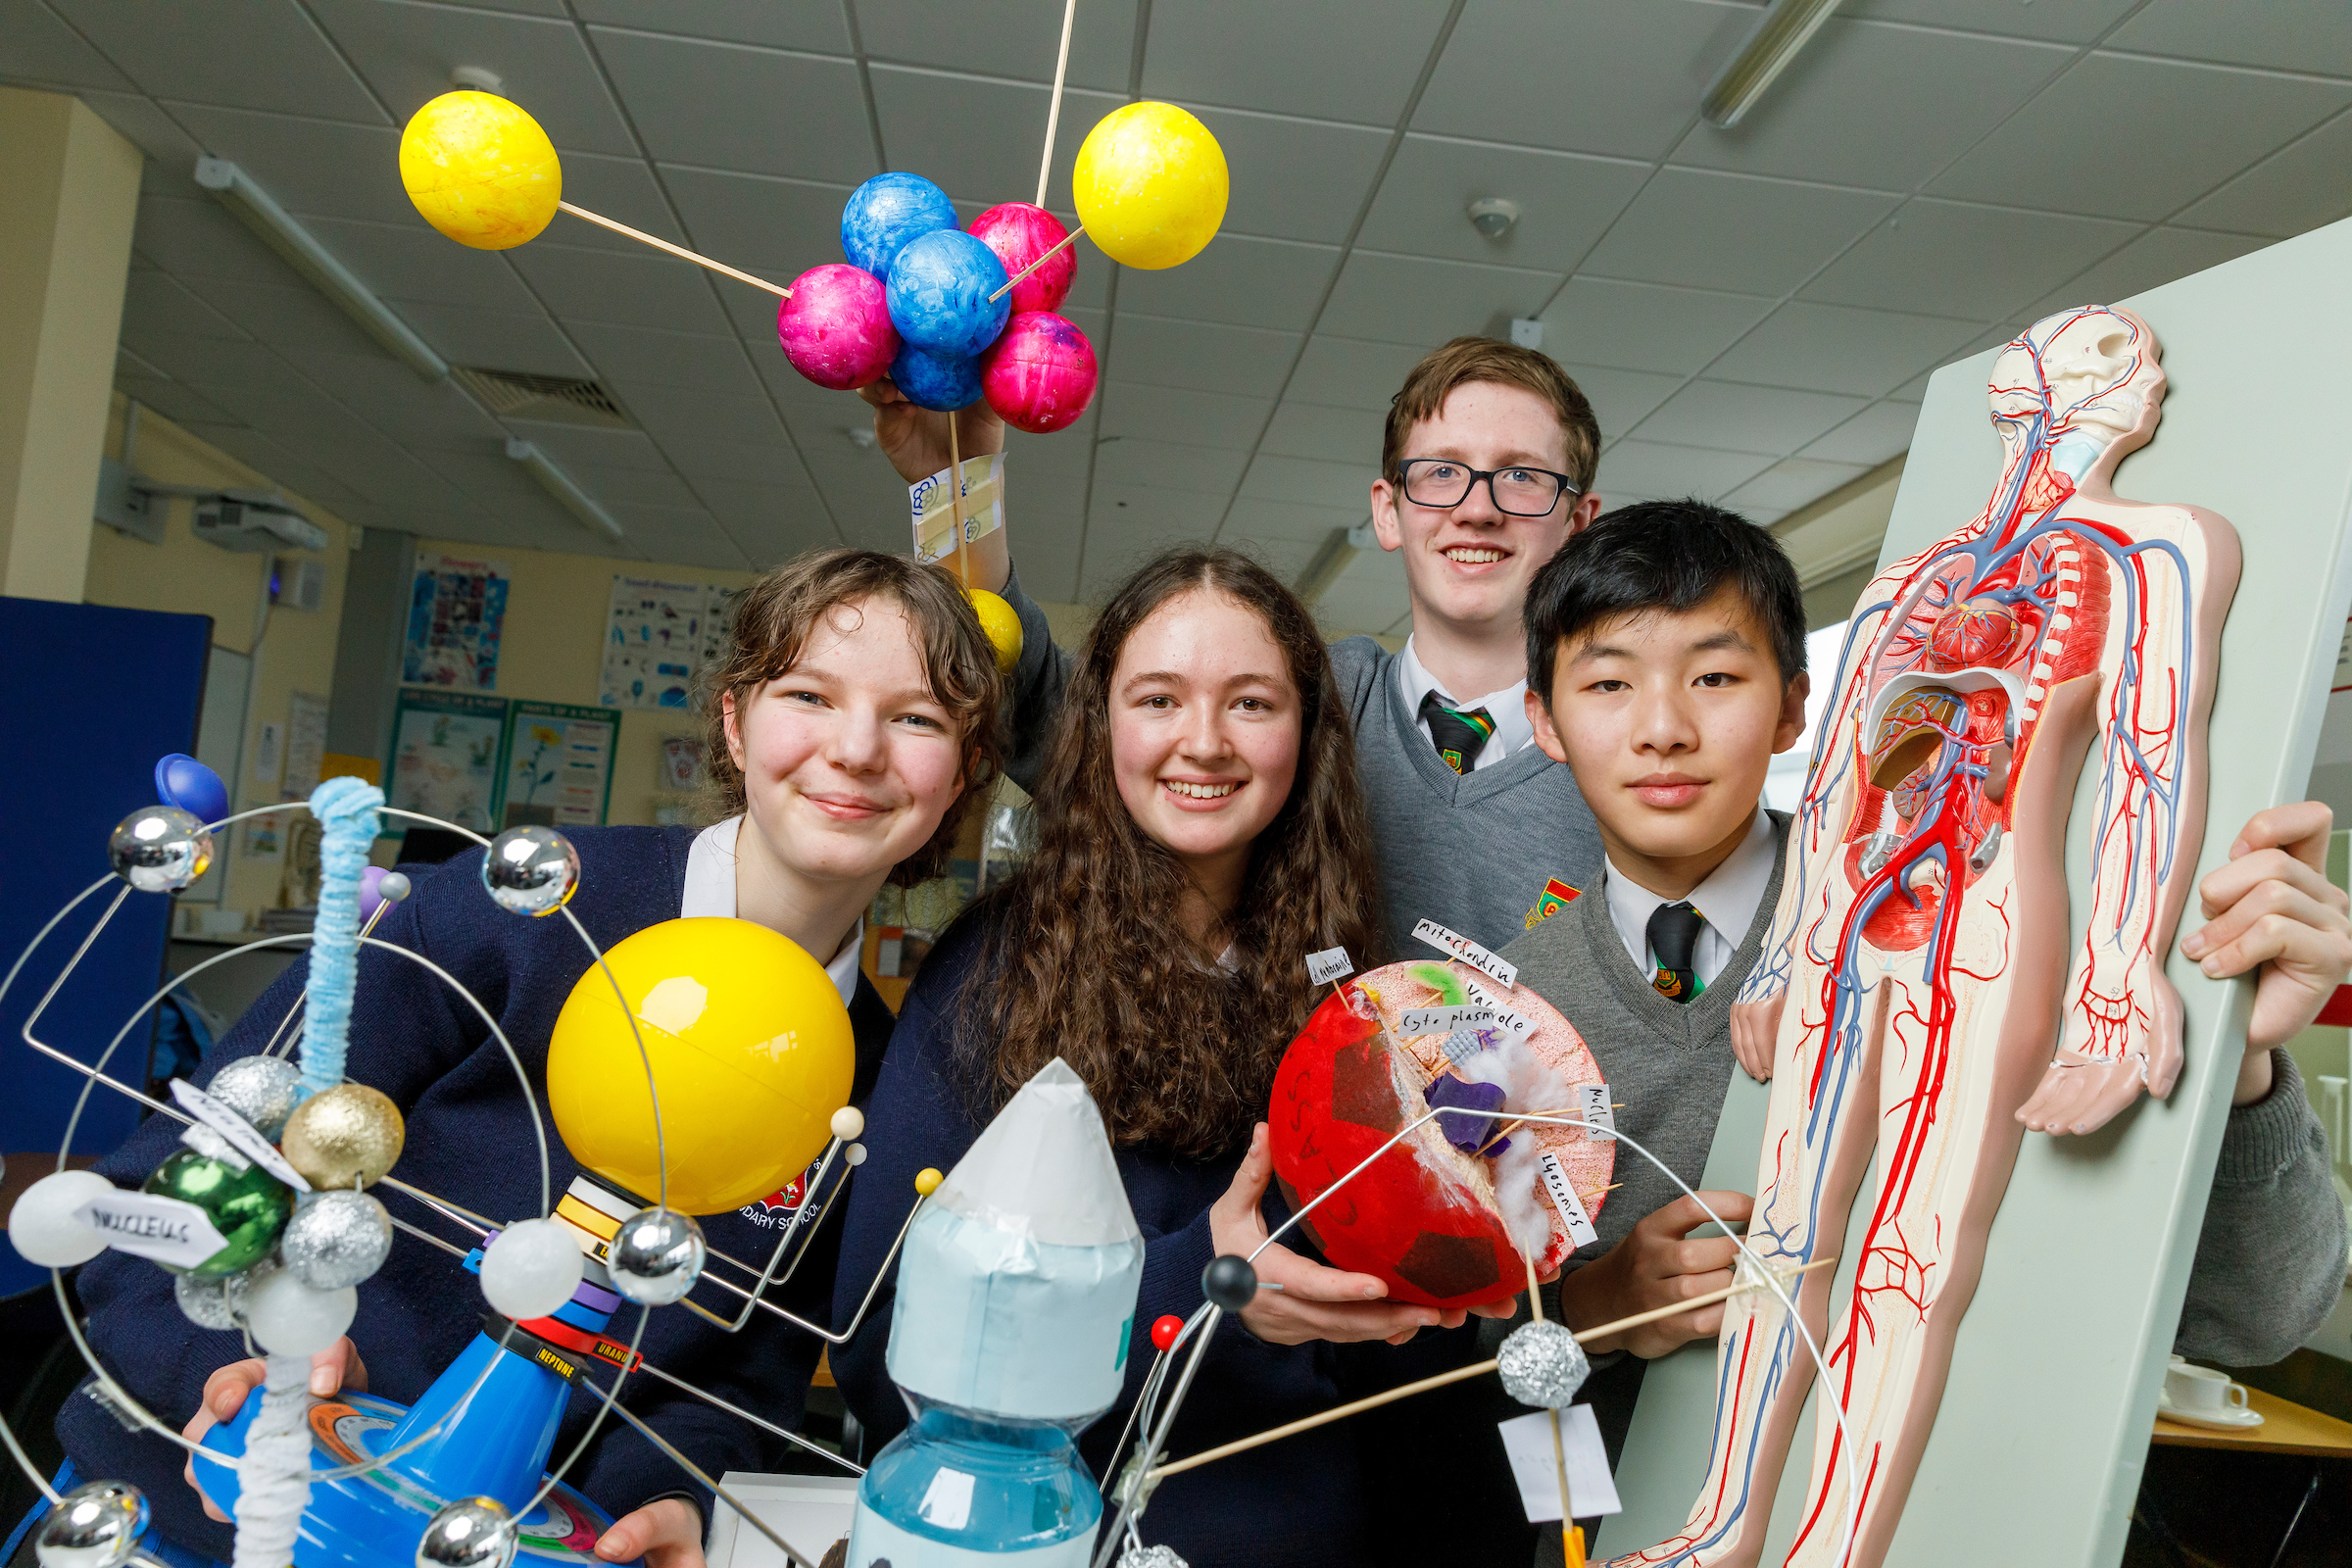 Jenna O’Leary and Kate Byrne from St Raphaela’s Secondary School, with Eoghan Larkin and Freeman Chu from Oatlands College